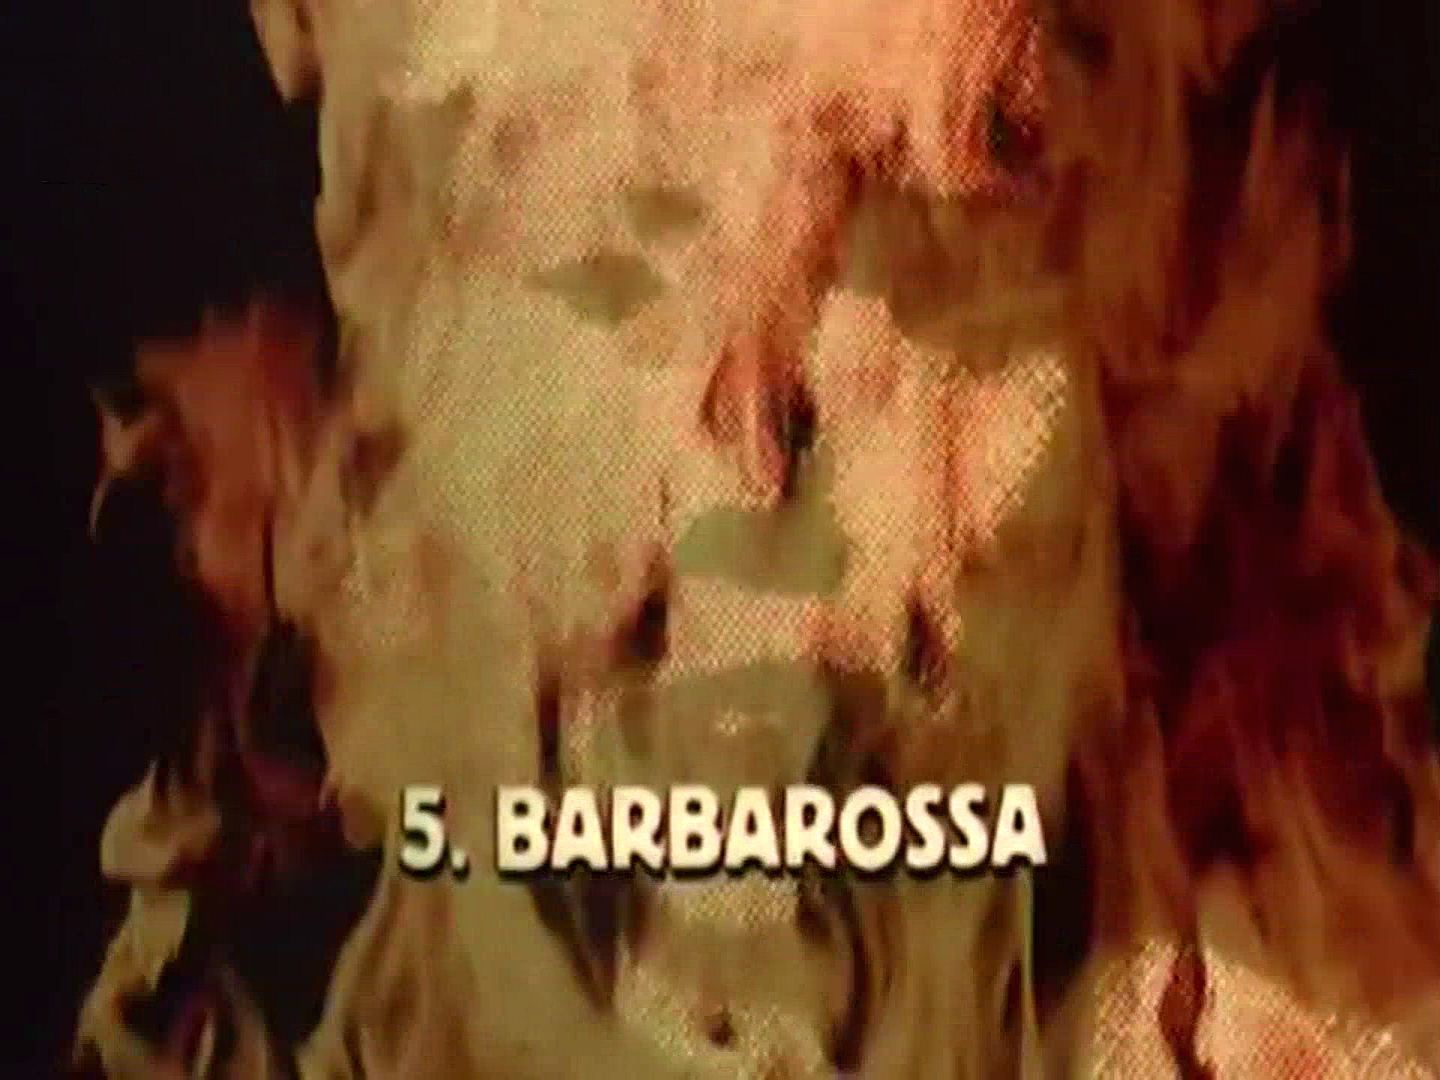 Main title from the 1973 ‘Barbarossa’ episode of The World at War (1973-74) (1)